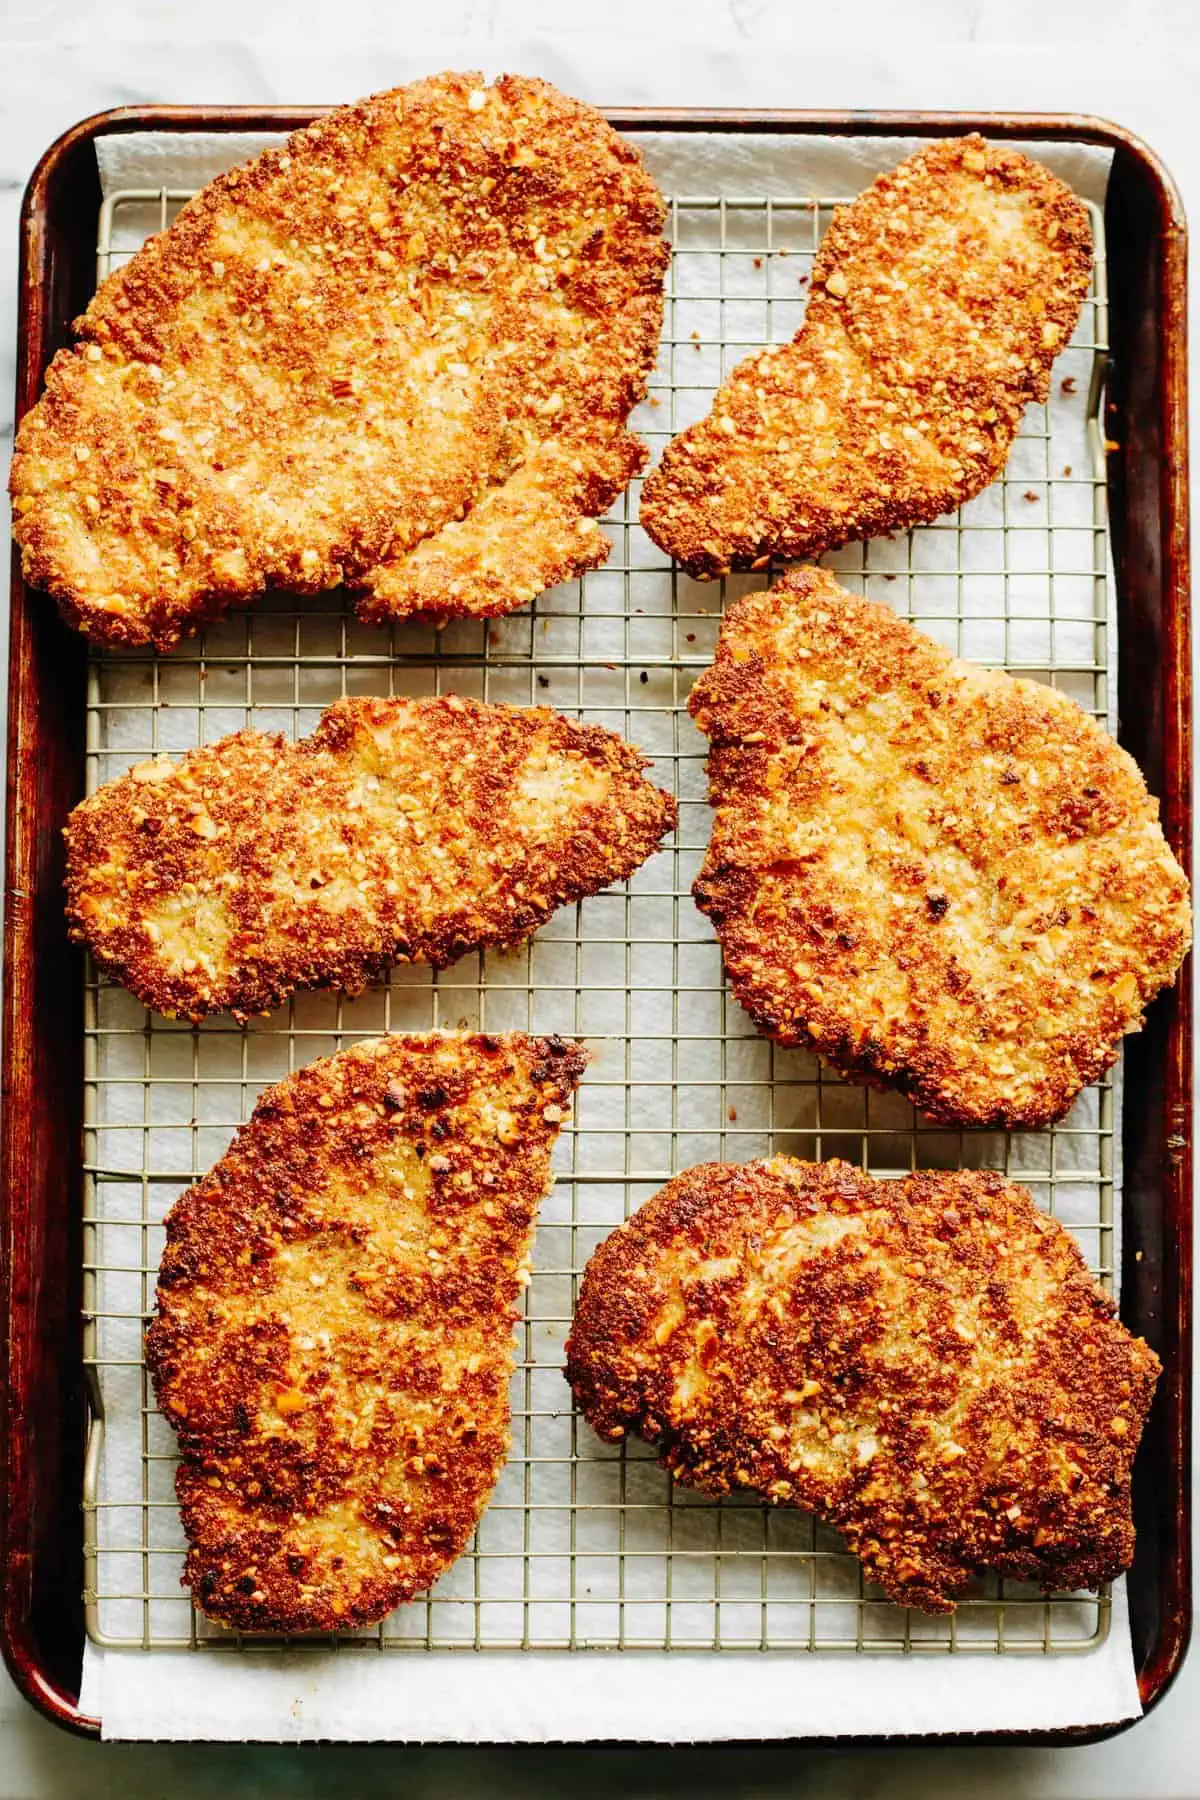 Almond breaded chicken cutlets draining on a wire rack over a baking sheet.